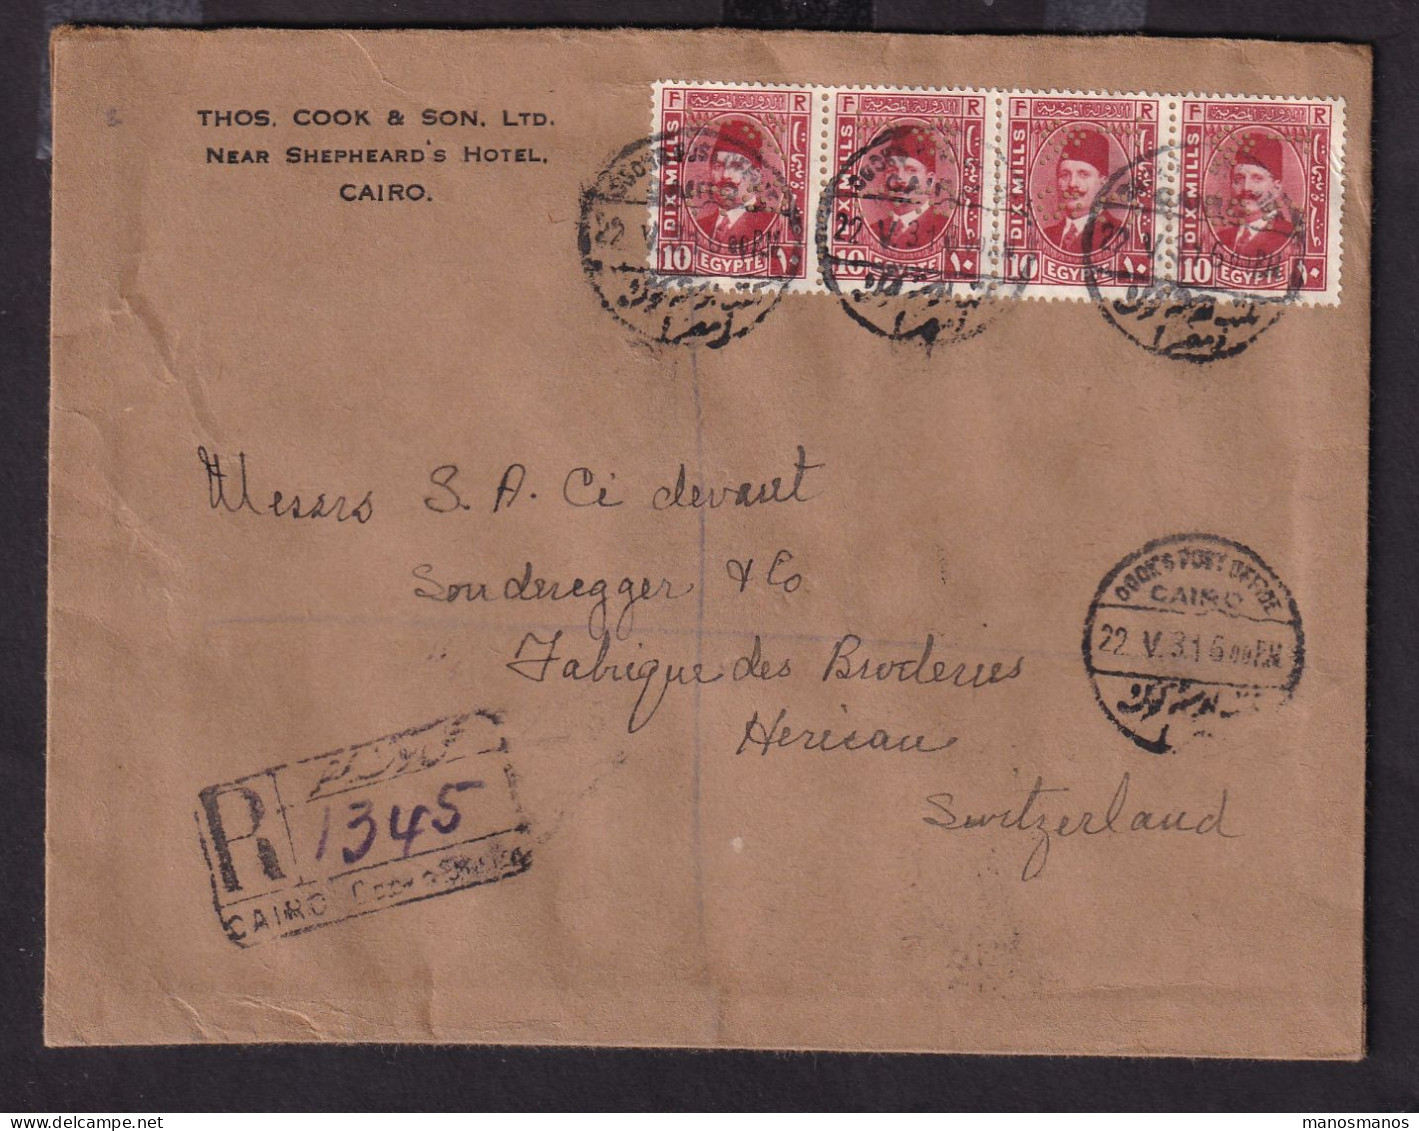 353/31 -- EGYPT PERFINS - Registered Envelope Fouad Stamps For 40 Mills COOK'S P.O. CAIRO 1931 - Perf. T.C. § S. - Covers & Documents